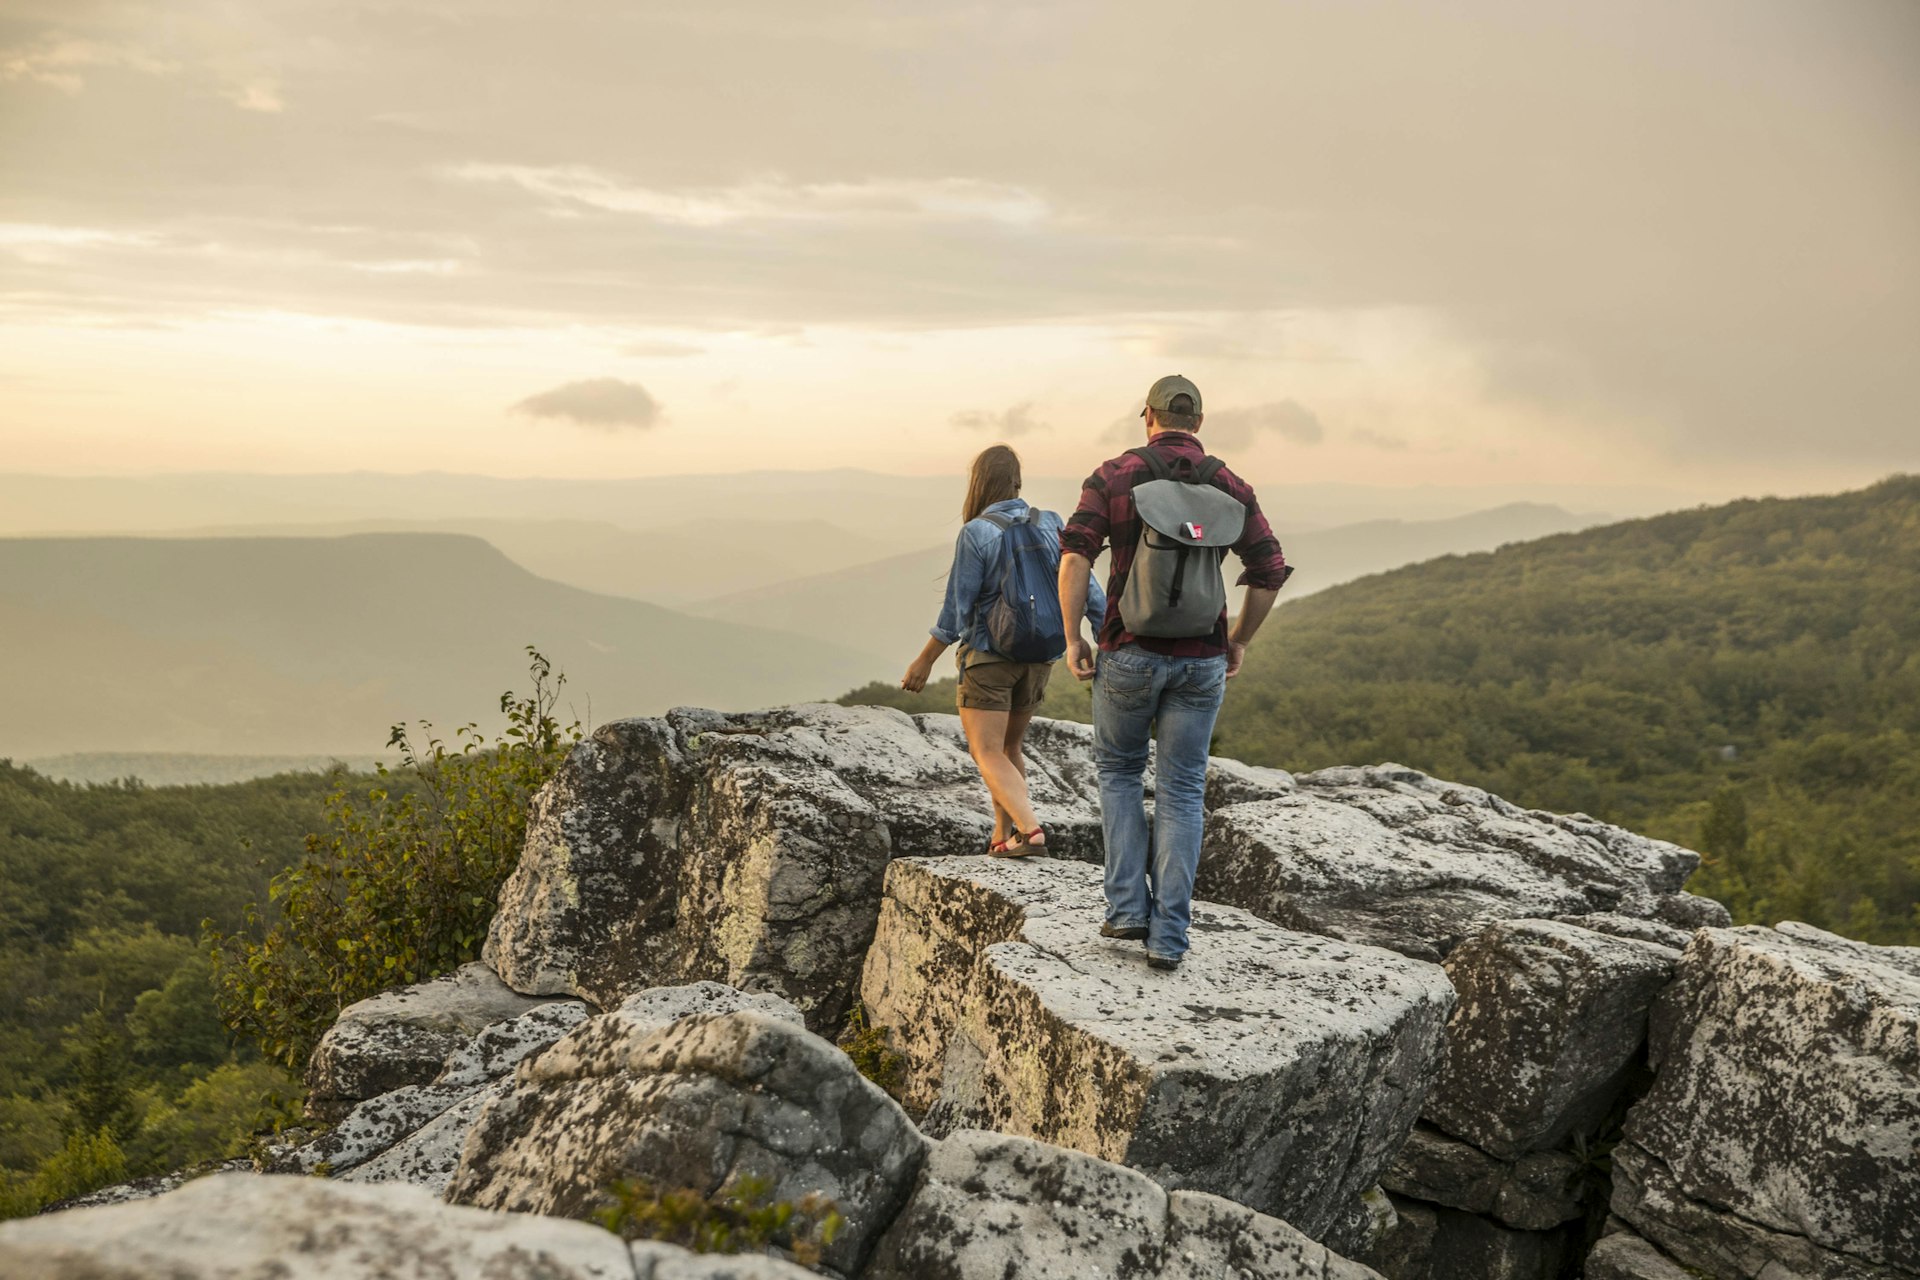 A man and woman hiking over rocks in West Virginia